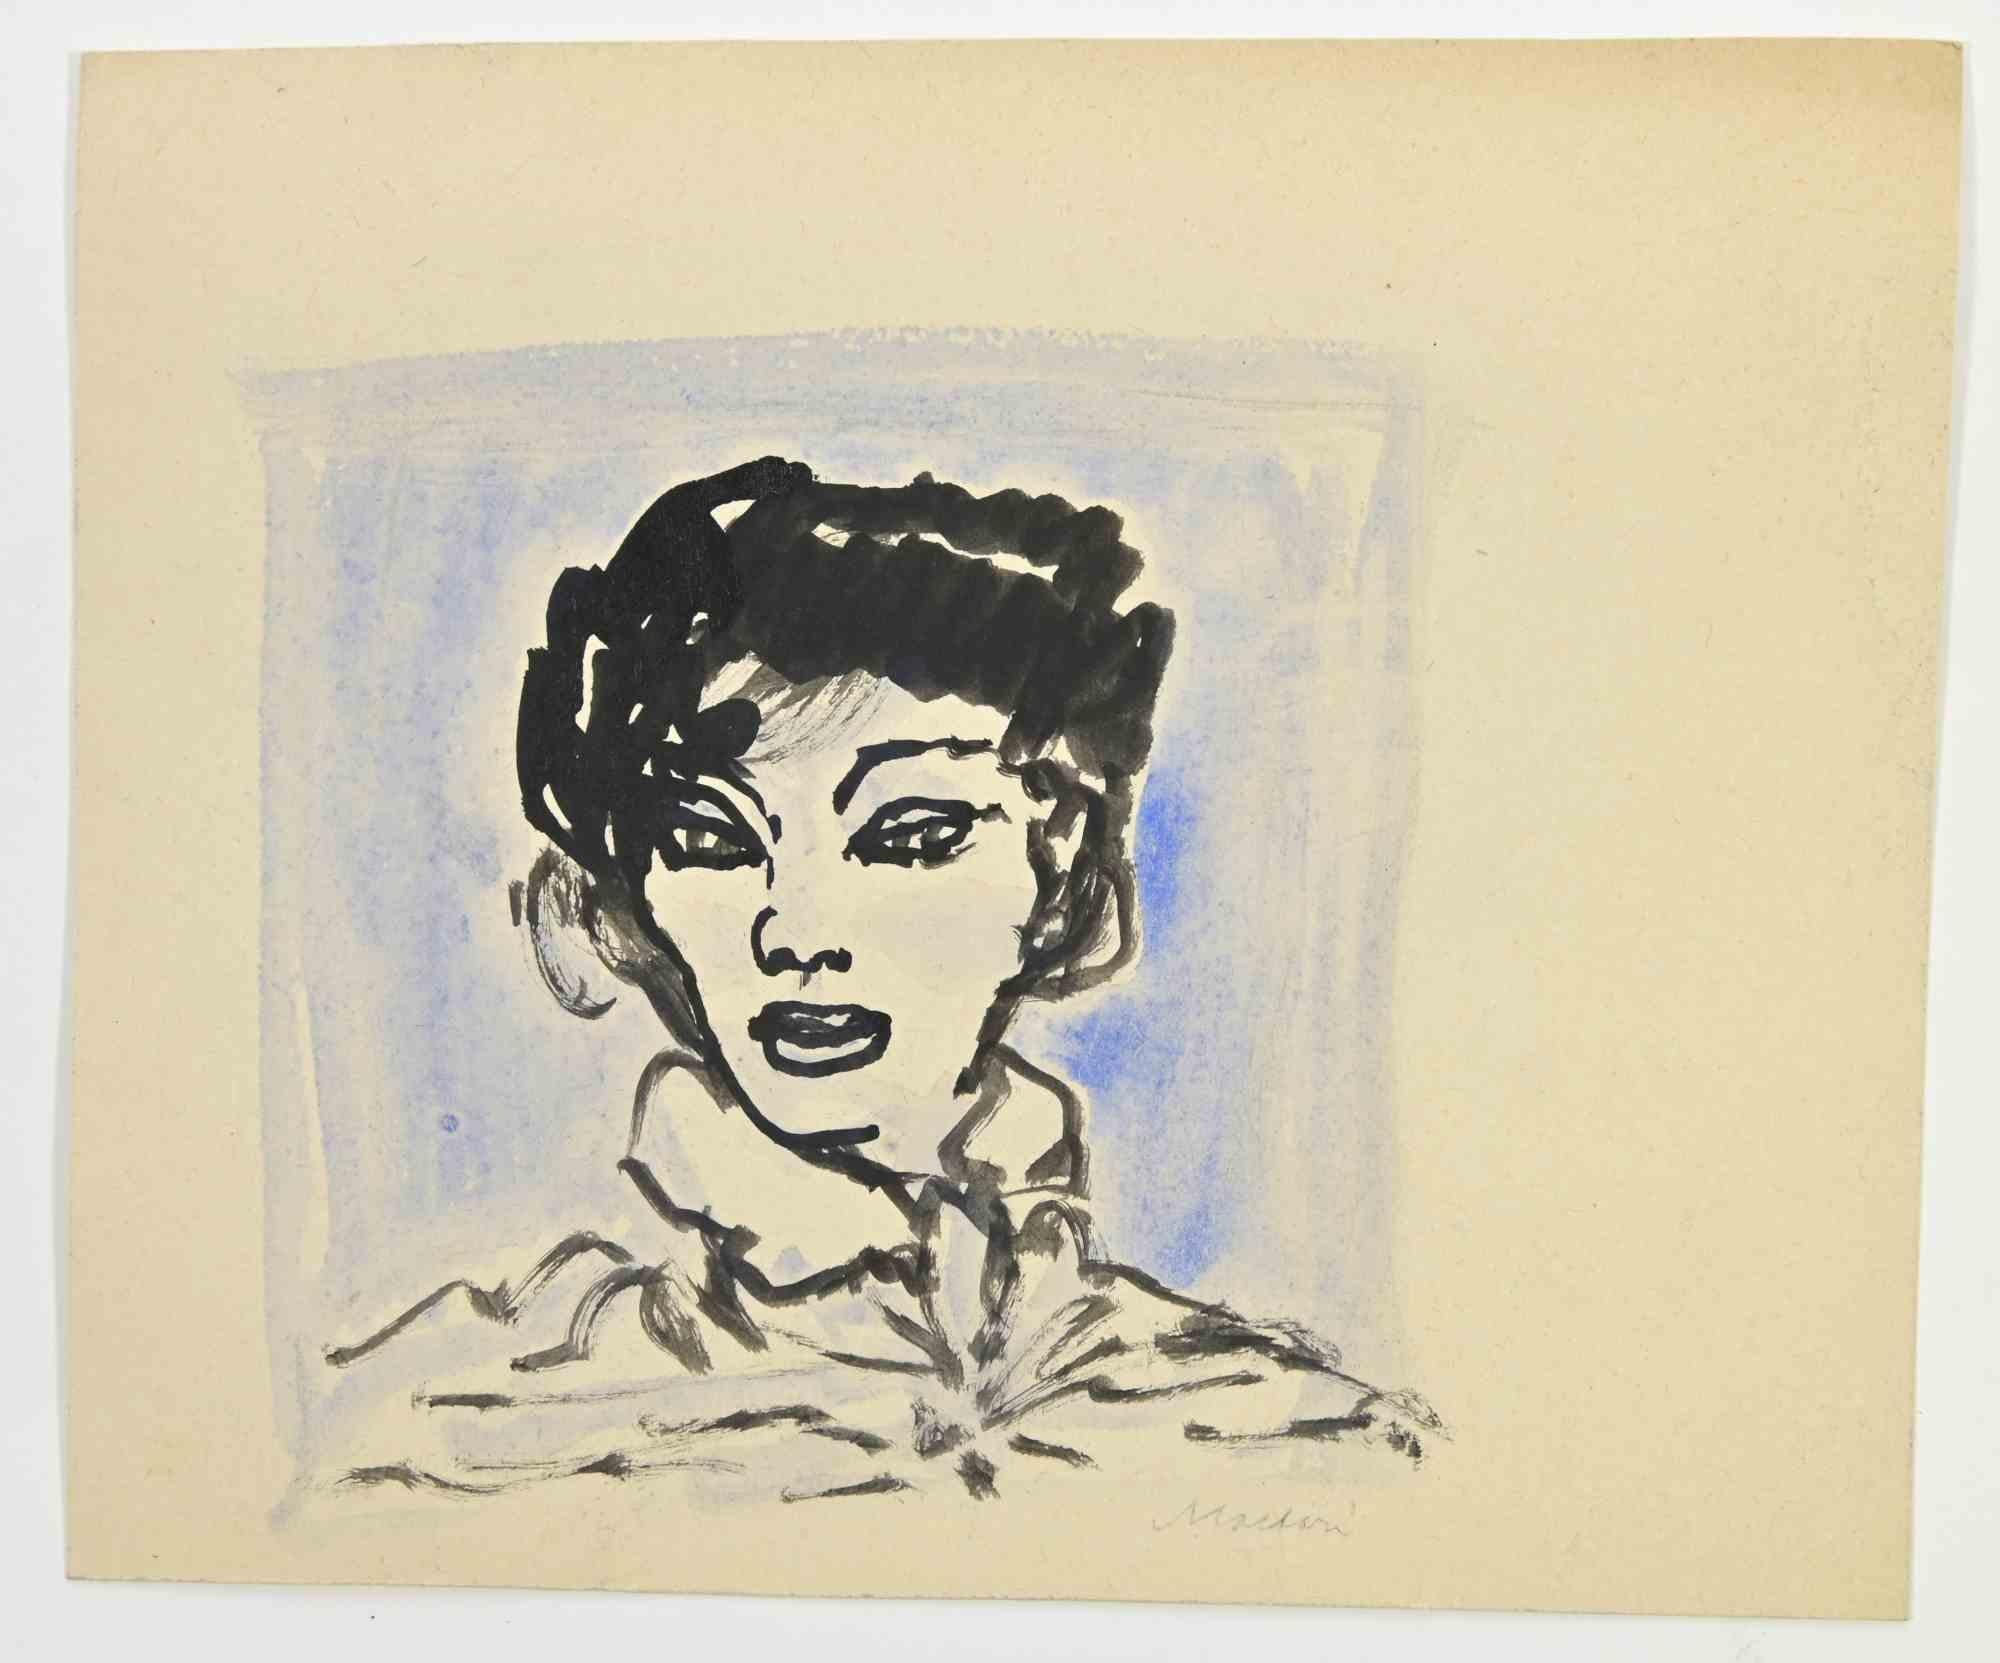 The Portrait - Drawing by Mino Maccari - 1960s